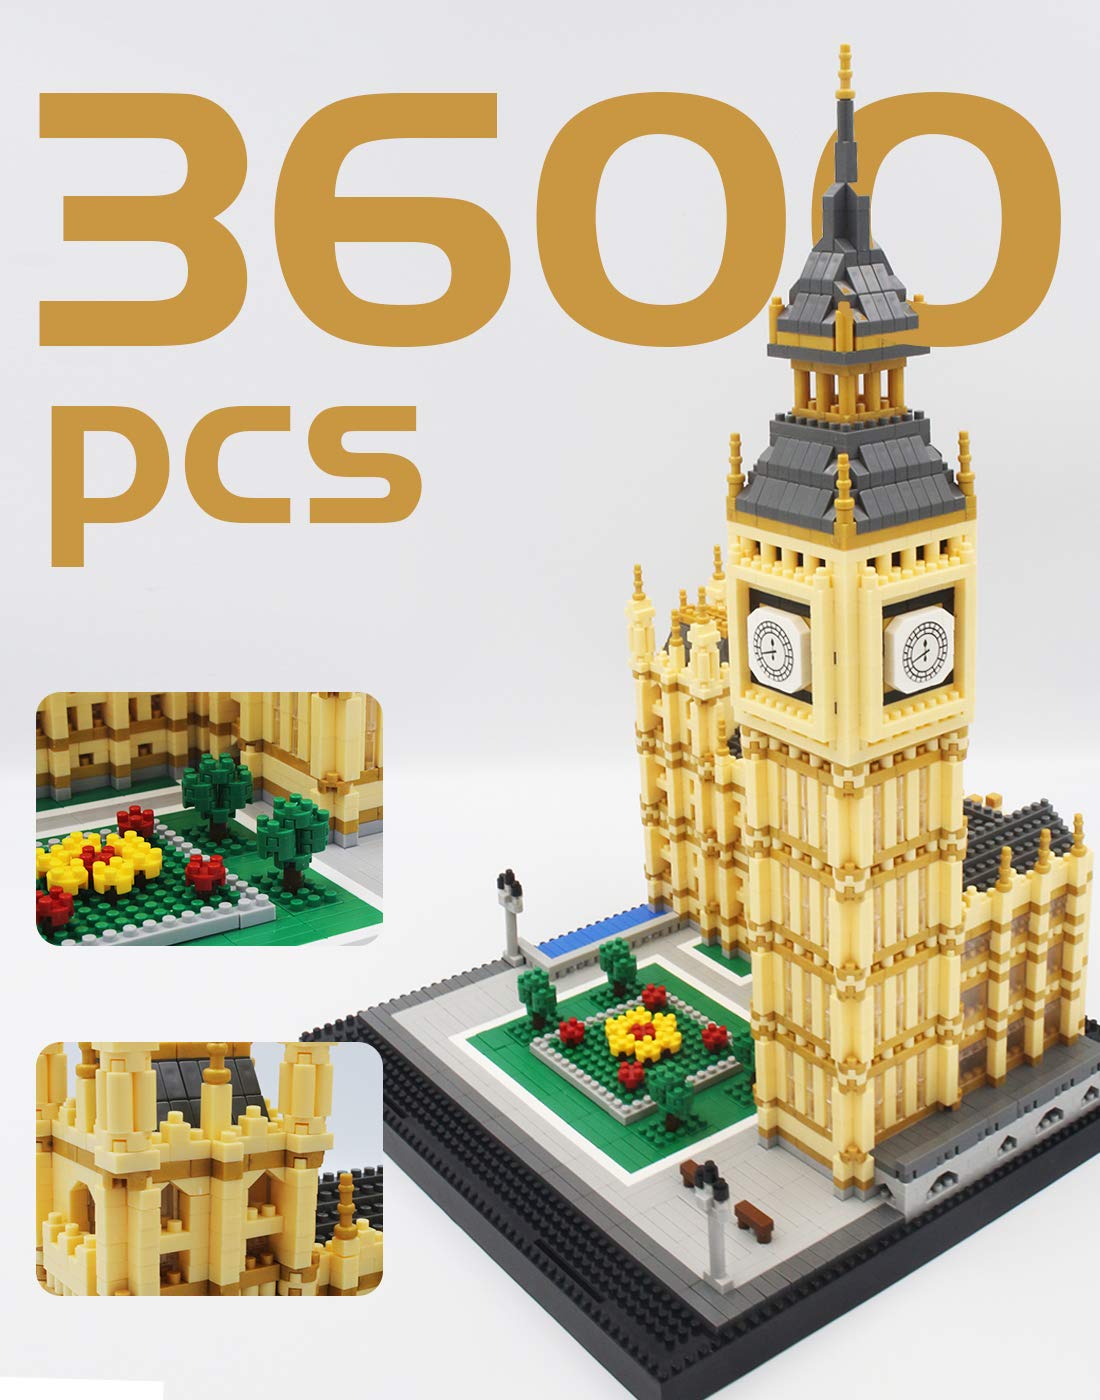 dOvOb Real Big Ben Micro Building Blocks Set (3600PCS) - World Famous Architectural Model Toys Gifts for Kid and Adult